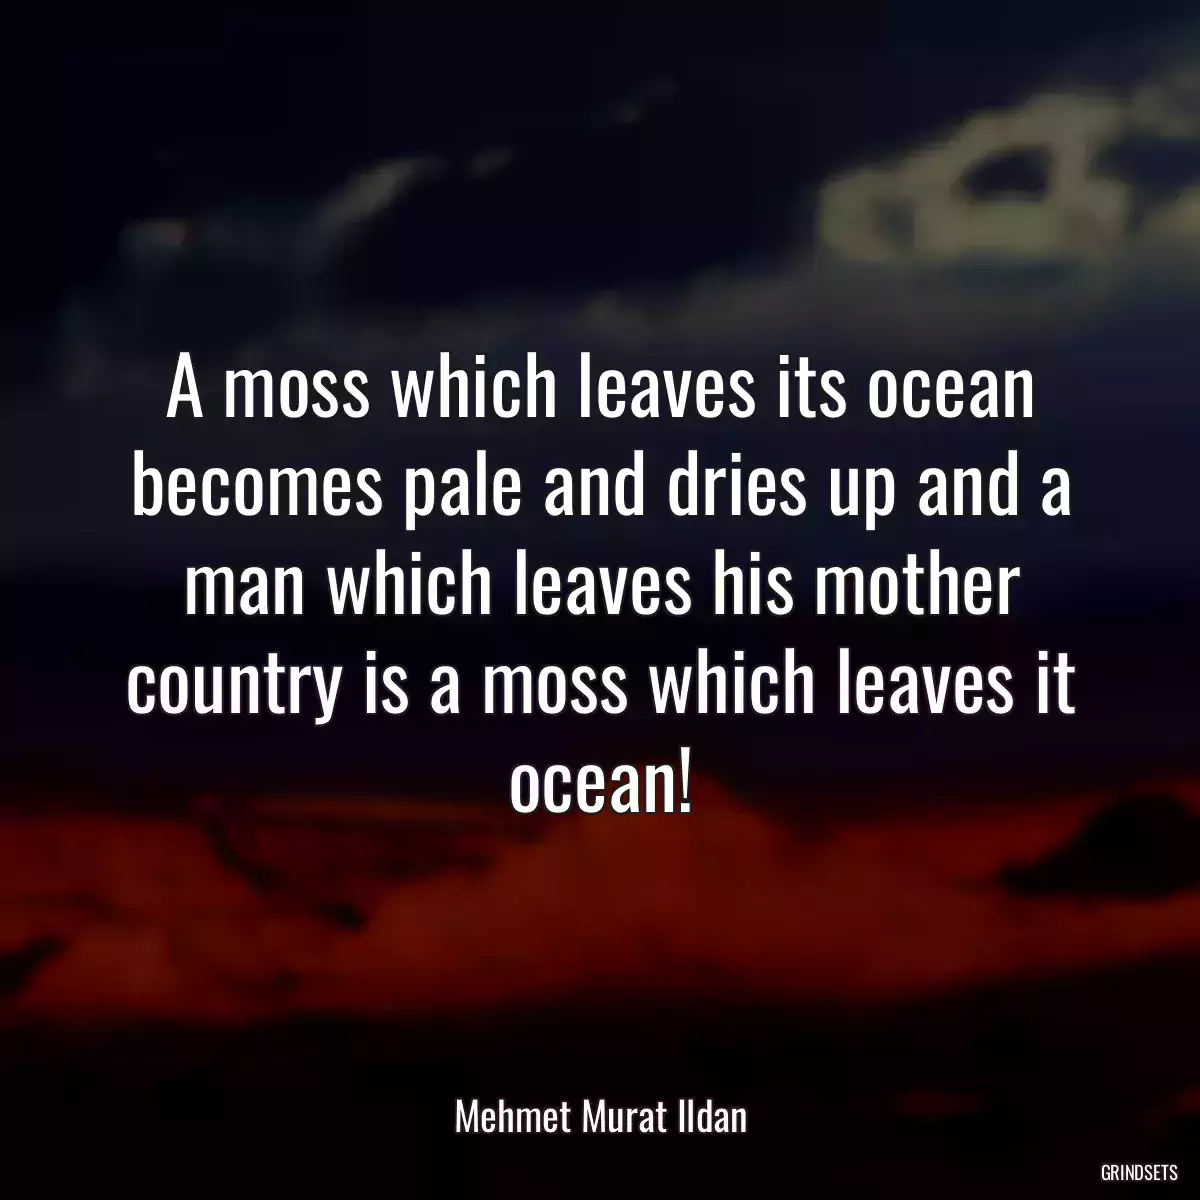 A moss which leaves its ocean becomes pale and dries up and a man which leaves his mother country is a moss which leaves it ocean!